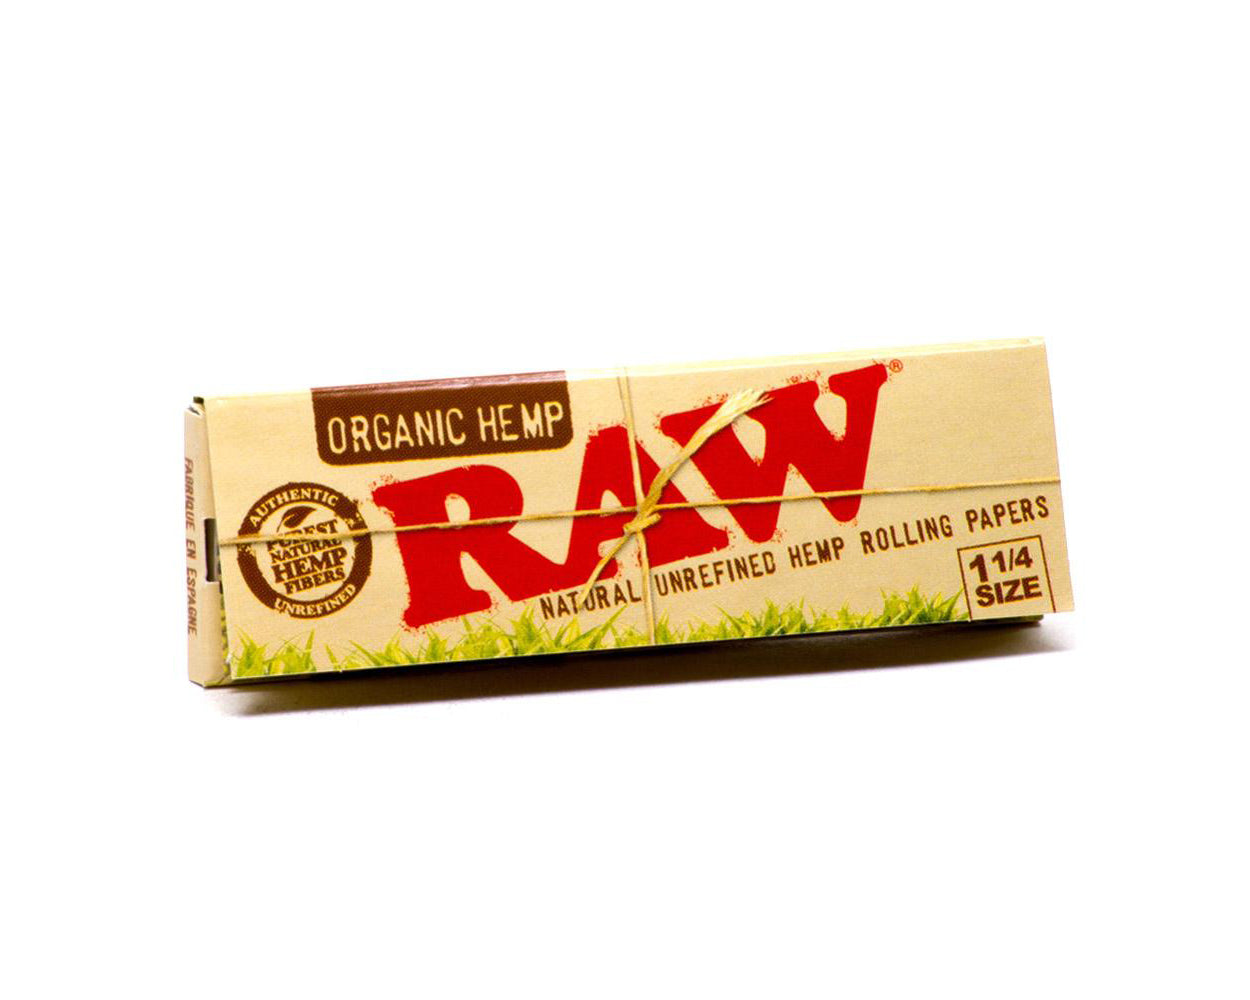 RAW | 'Retail Display' 1 1/4 Size Rolling Papers | 83mm - Organic Hemp - 24 Count - 3